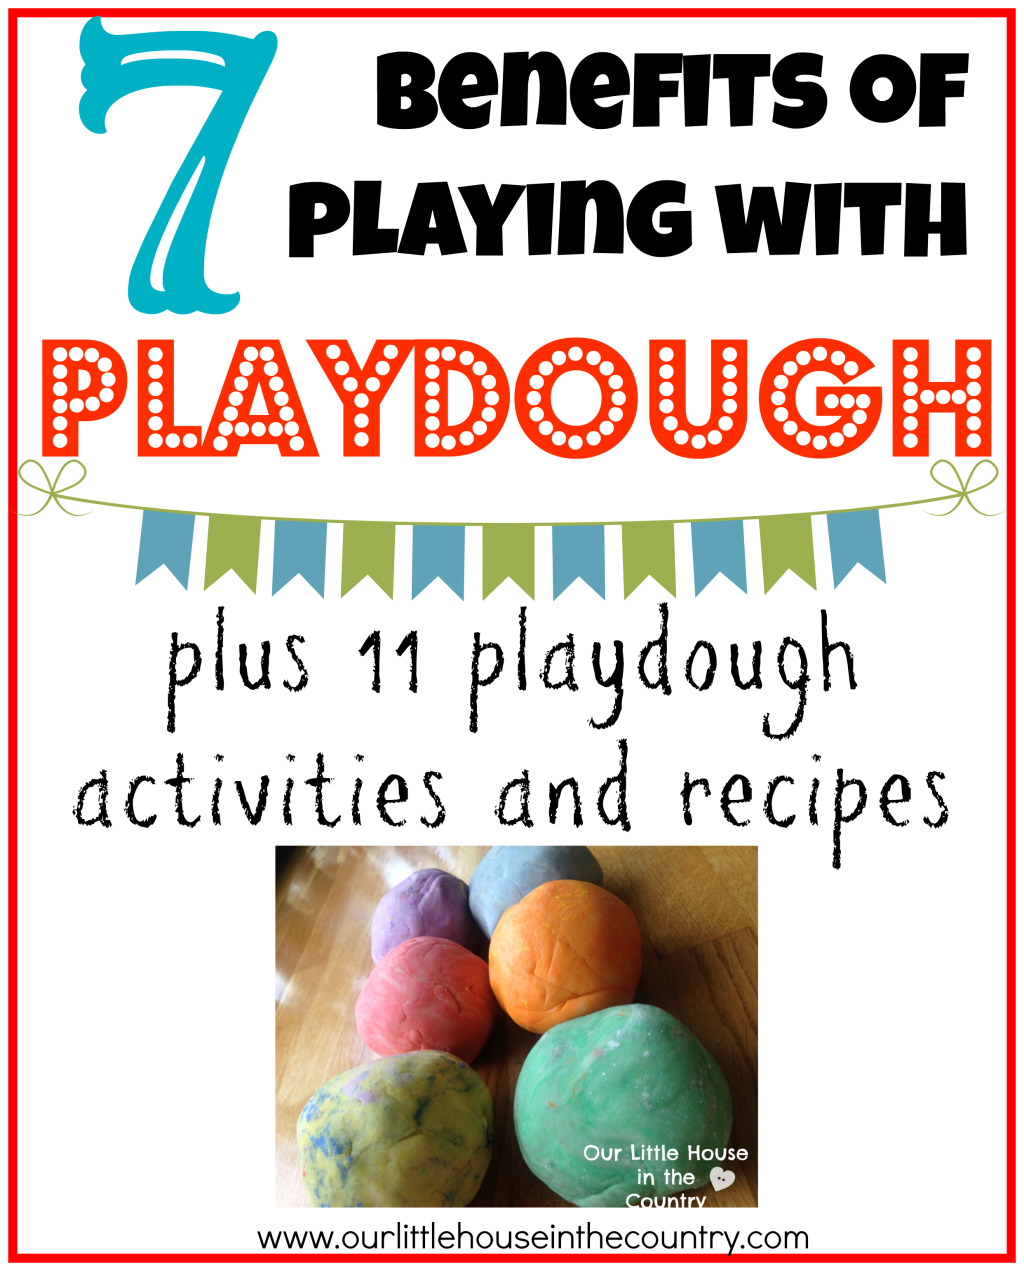 The Benefits of Playing with Playdough